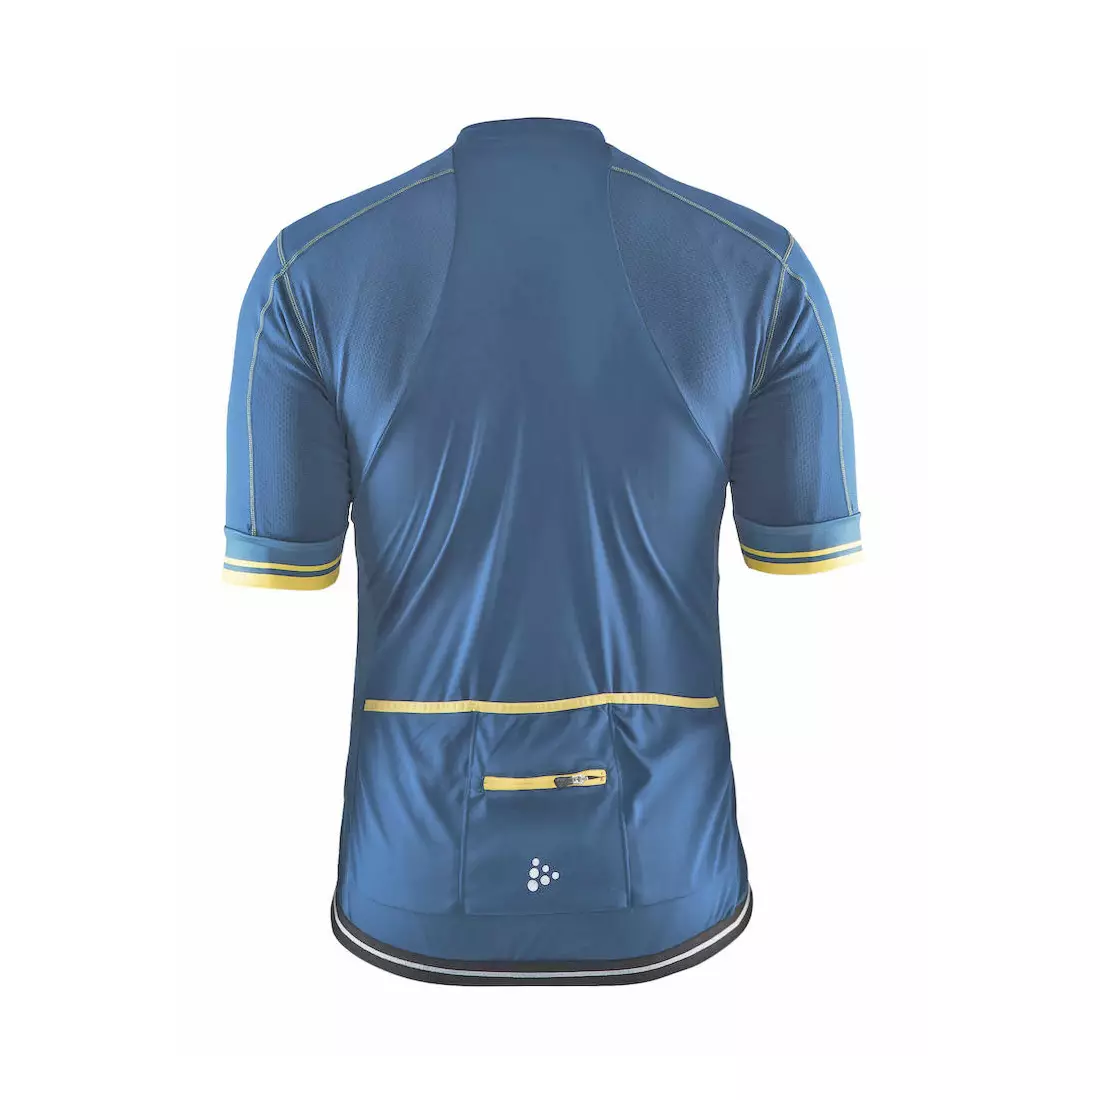 CRAFT PUNCHEUR men's cycling jersey 1903294-2381